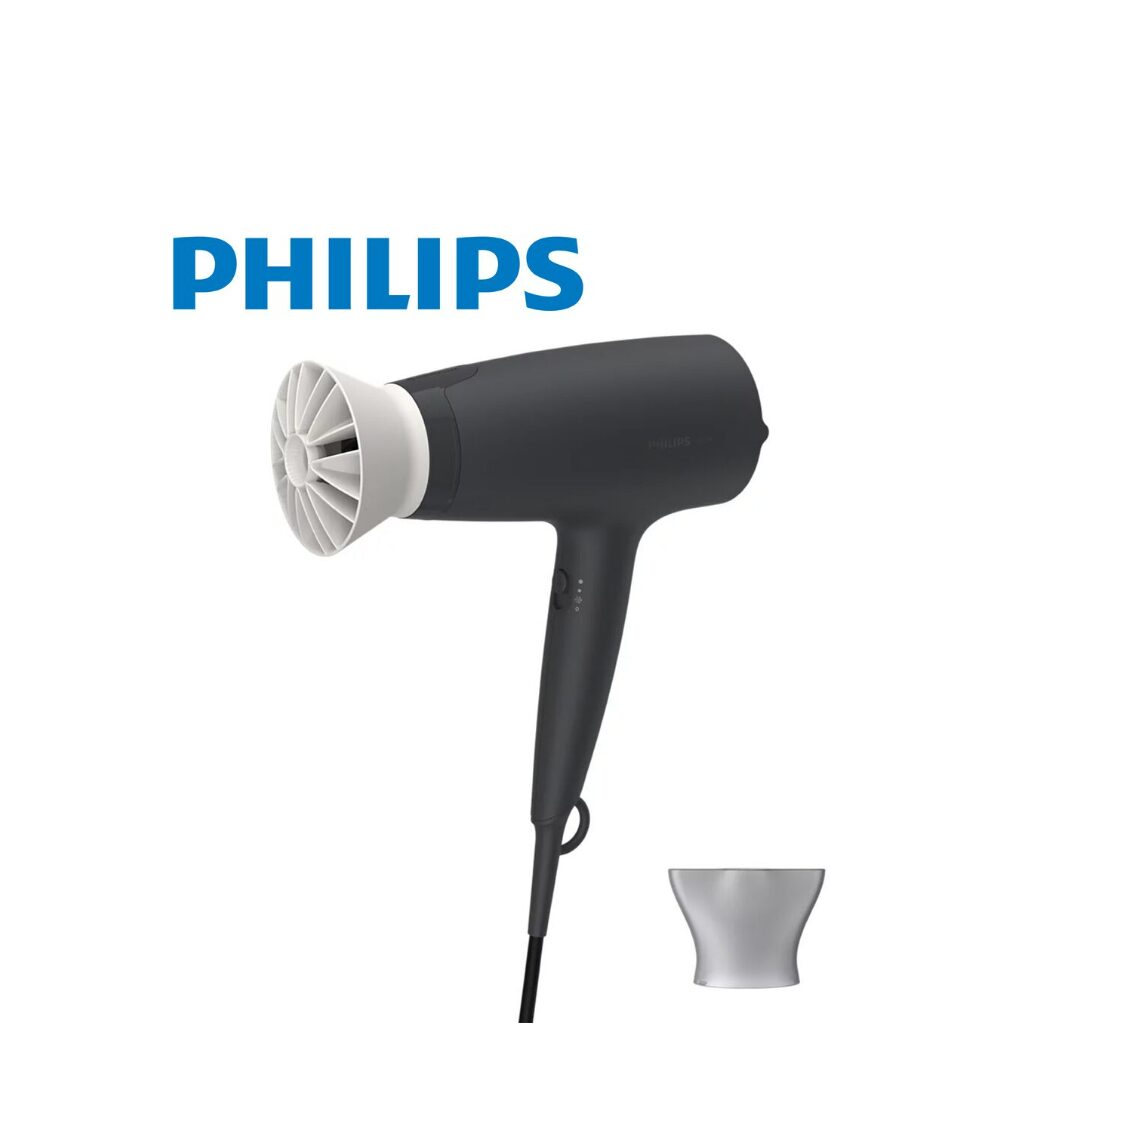 PHILIPS 1600W 3000 Series Hair Dryer with the ThermoProtect Attachment BHD30213